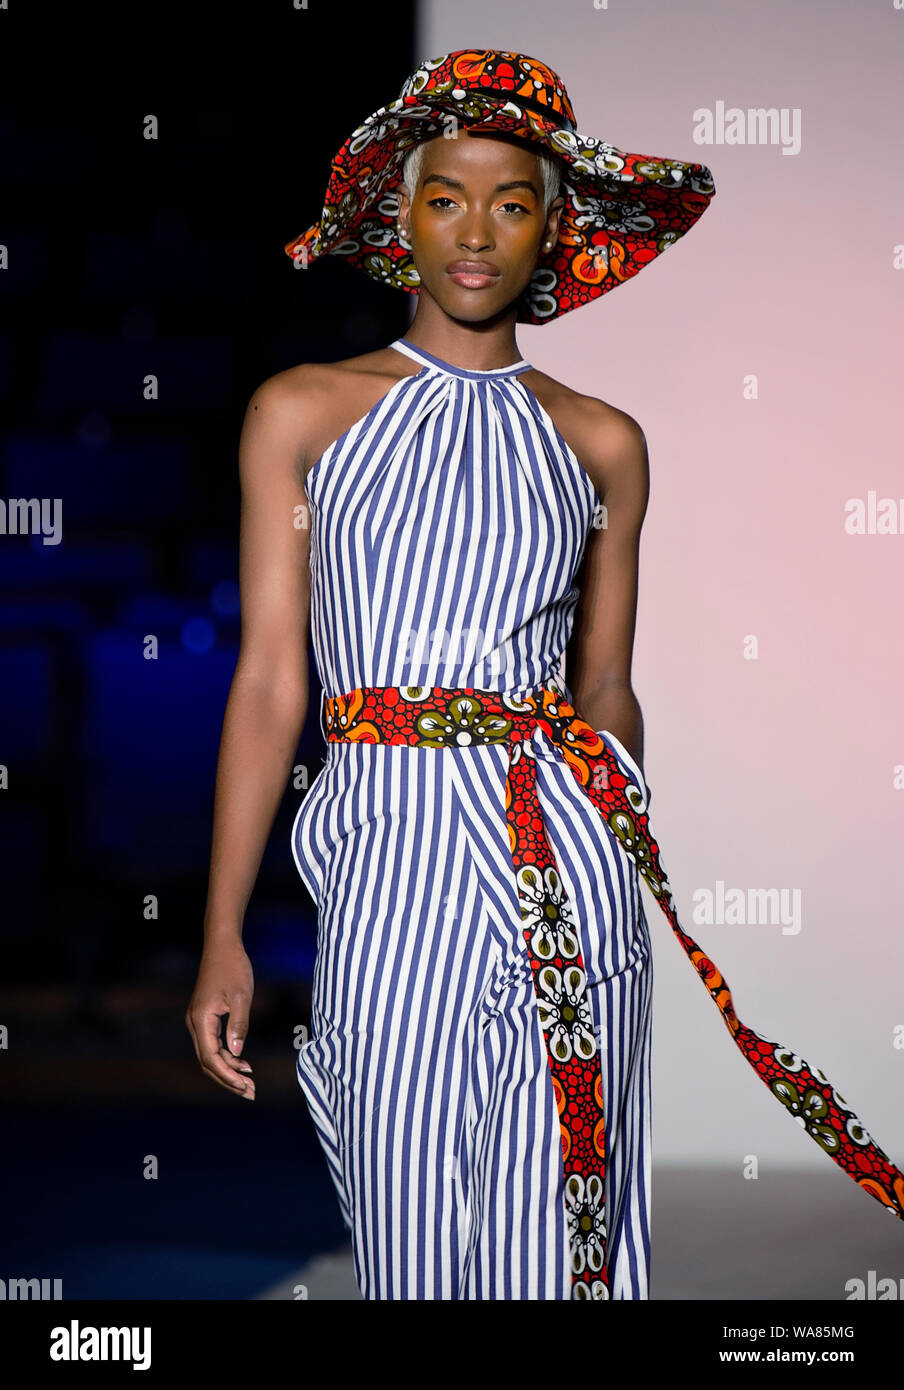 Africa Fashion Show London 2019. Selected image from runway shows highlighting designer trends & vibrant prints. Stock Photo